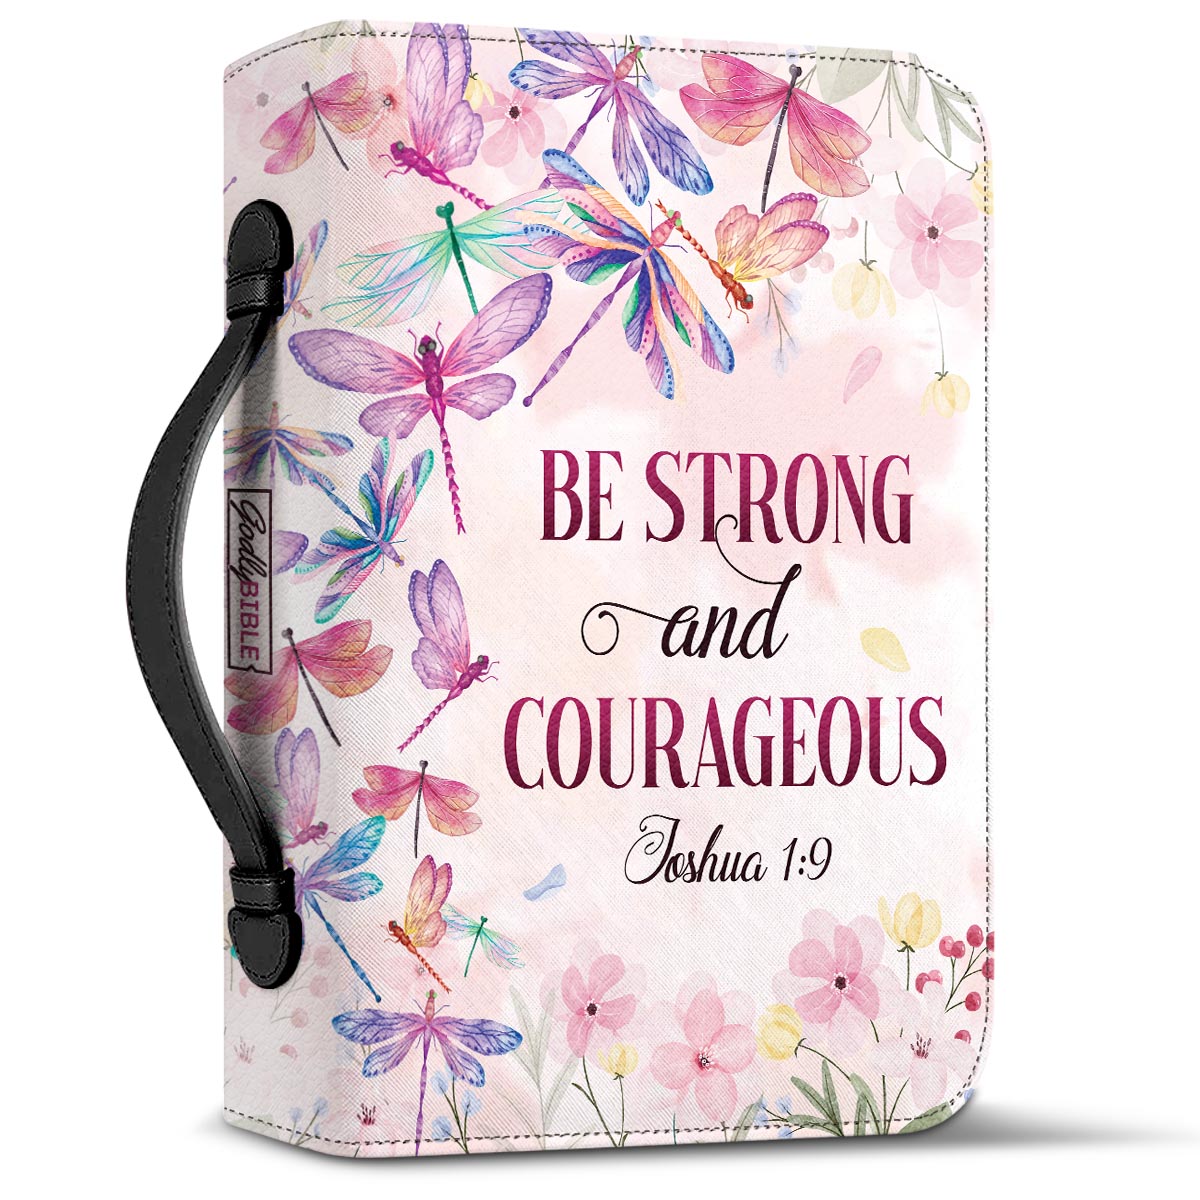  Personalized Bible Cover - Be Strong And Courageous Joshua 1 9 Dragonfly Bible Cover for Christians